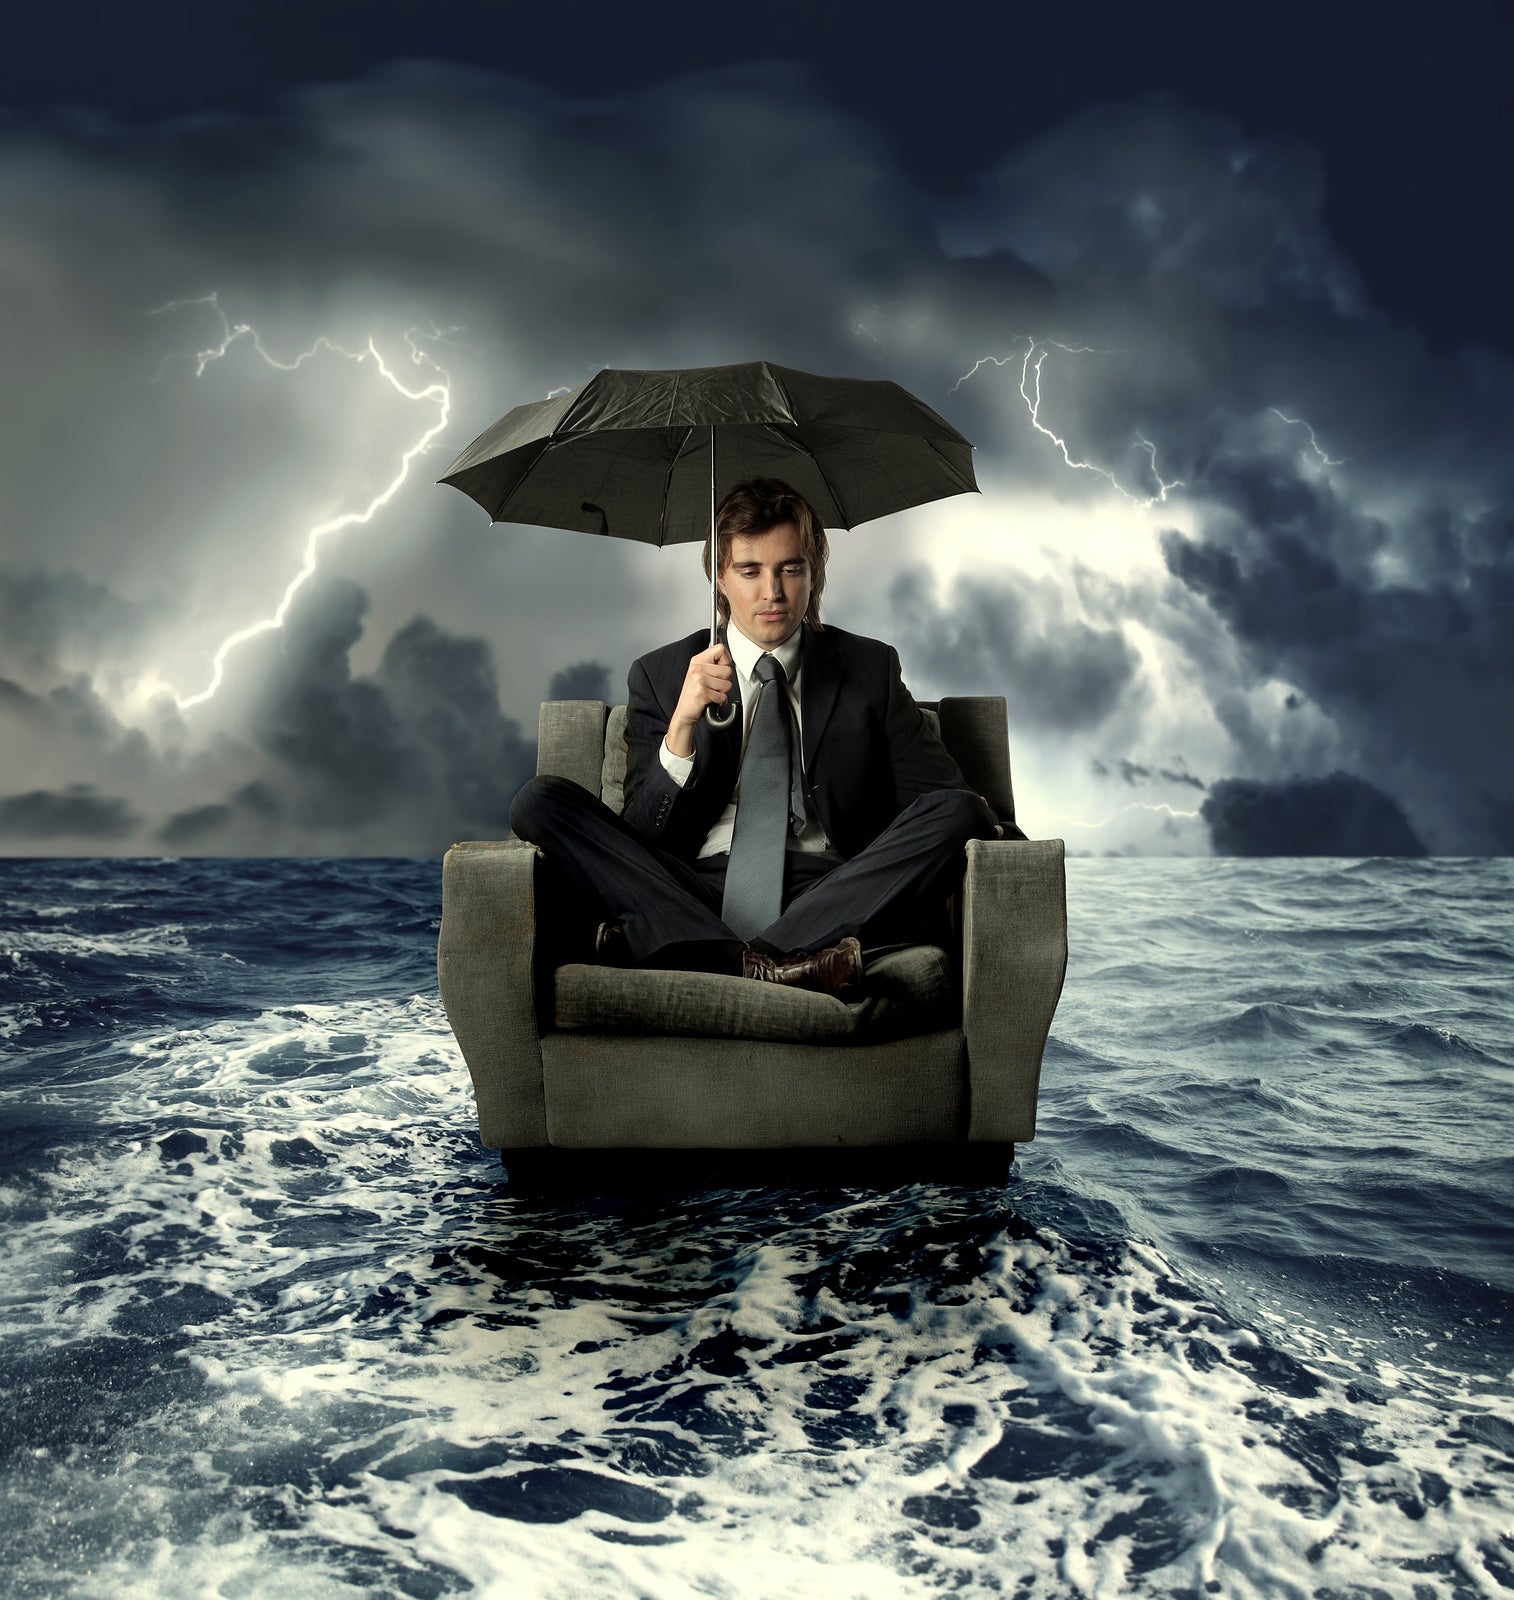 How to Prepare for Personal & Professional Crisis